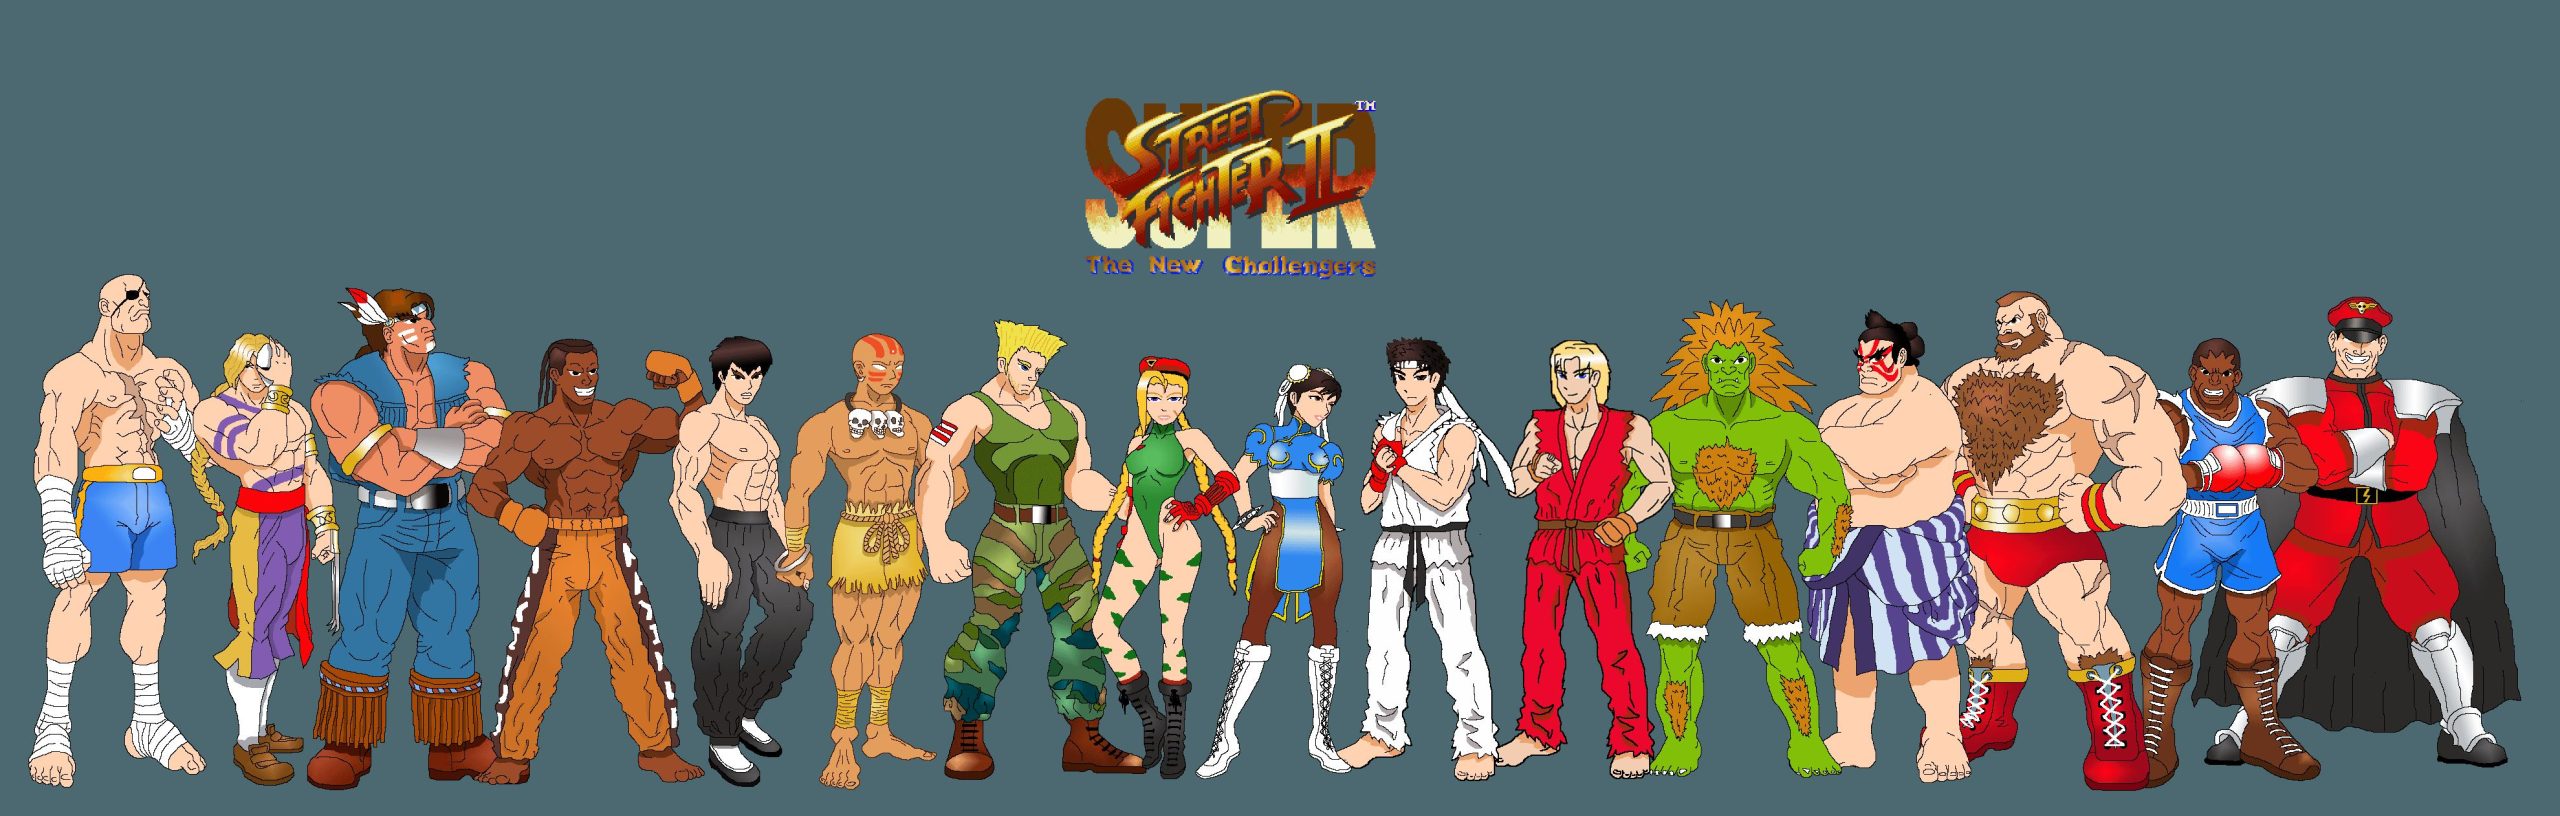 SUPER Street Fighter II TURBO HD Remix Hd Wallpapers For Pc